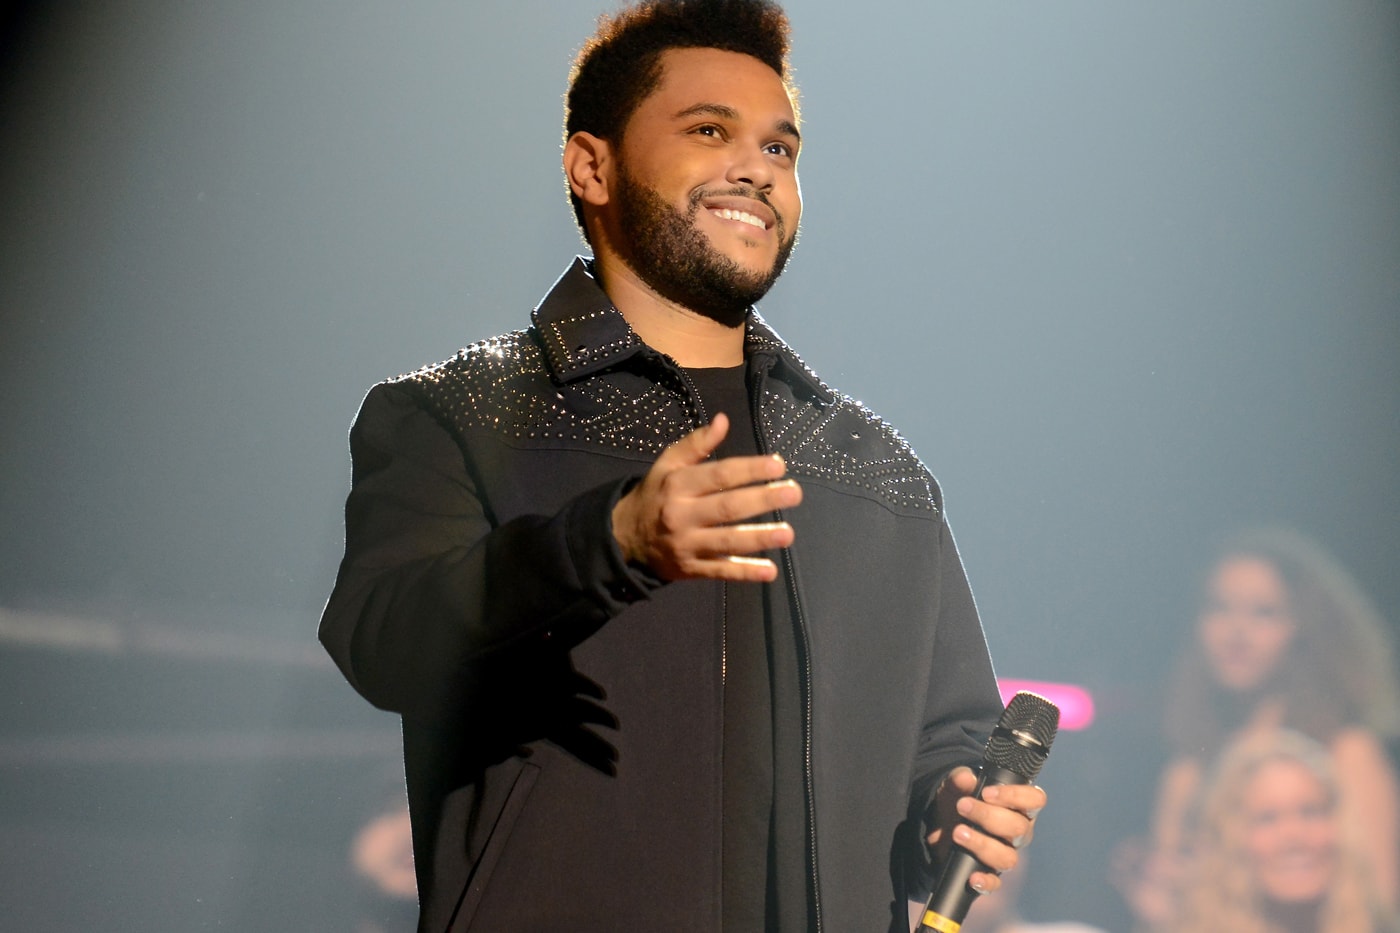 the-weeknd-lands-two-guinness-world-records